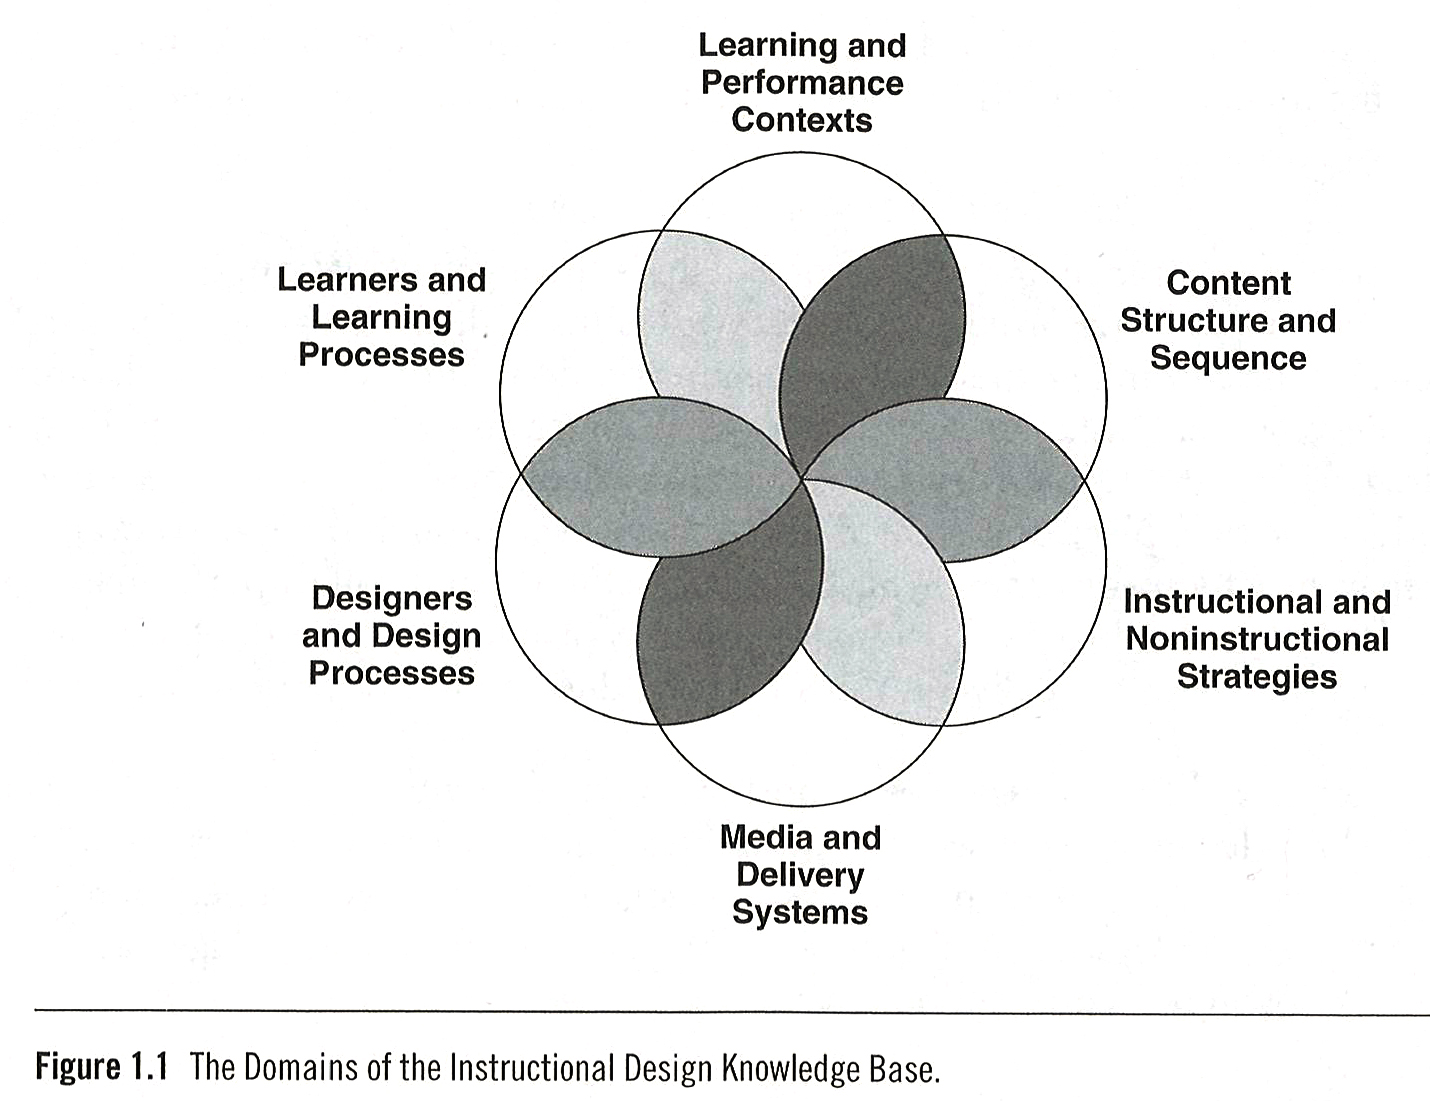 Domains of the instructional design knowledge base.